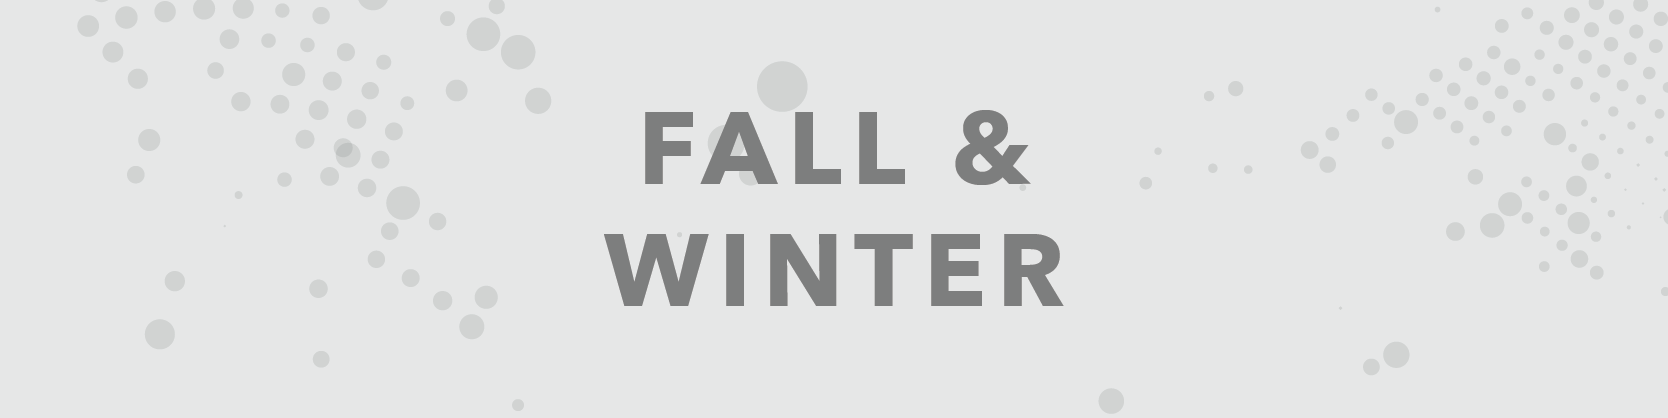 Brrr, it is getting cold out there, better cover up with our Fall & Winter Collection!